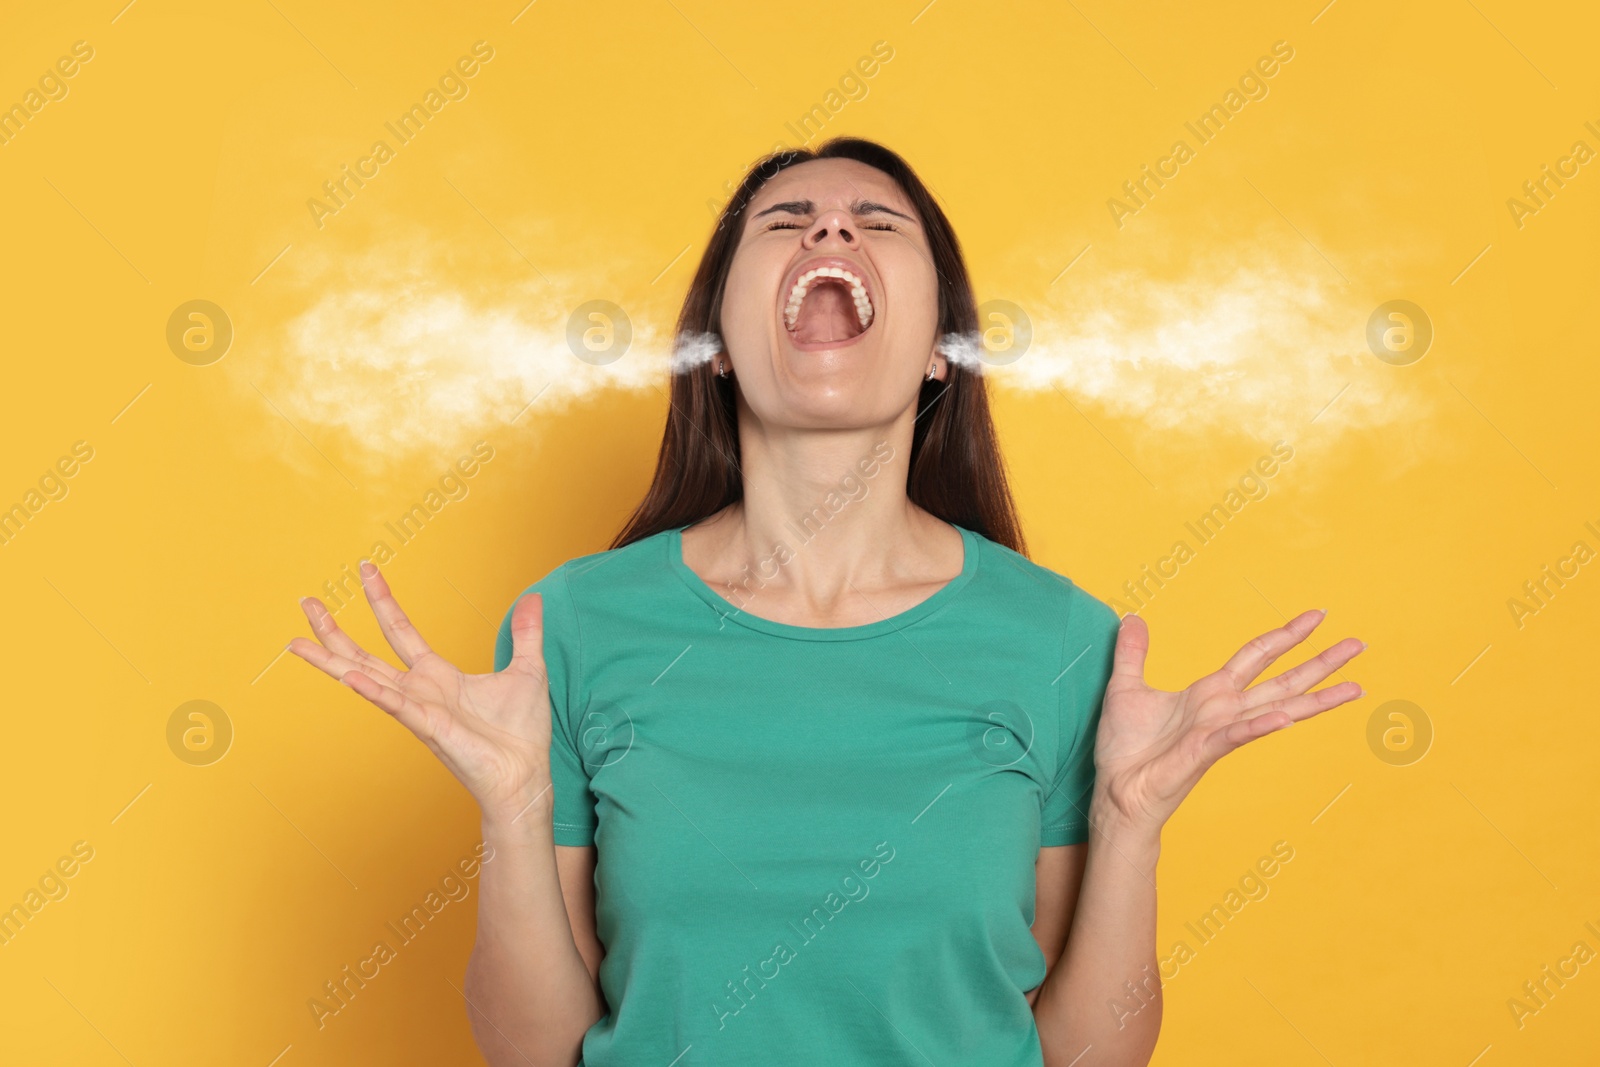 Image of Aggressive woman with steam coming out of her ears on orange background